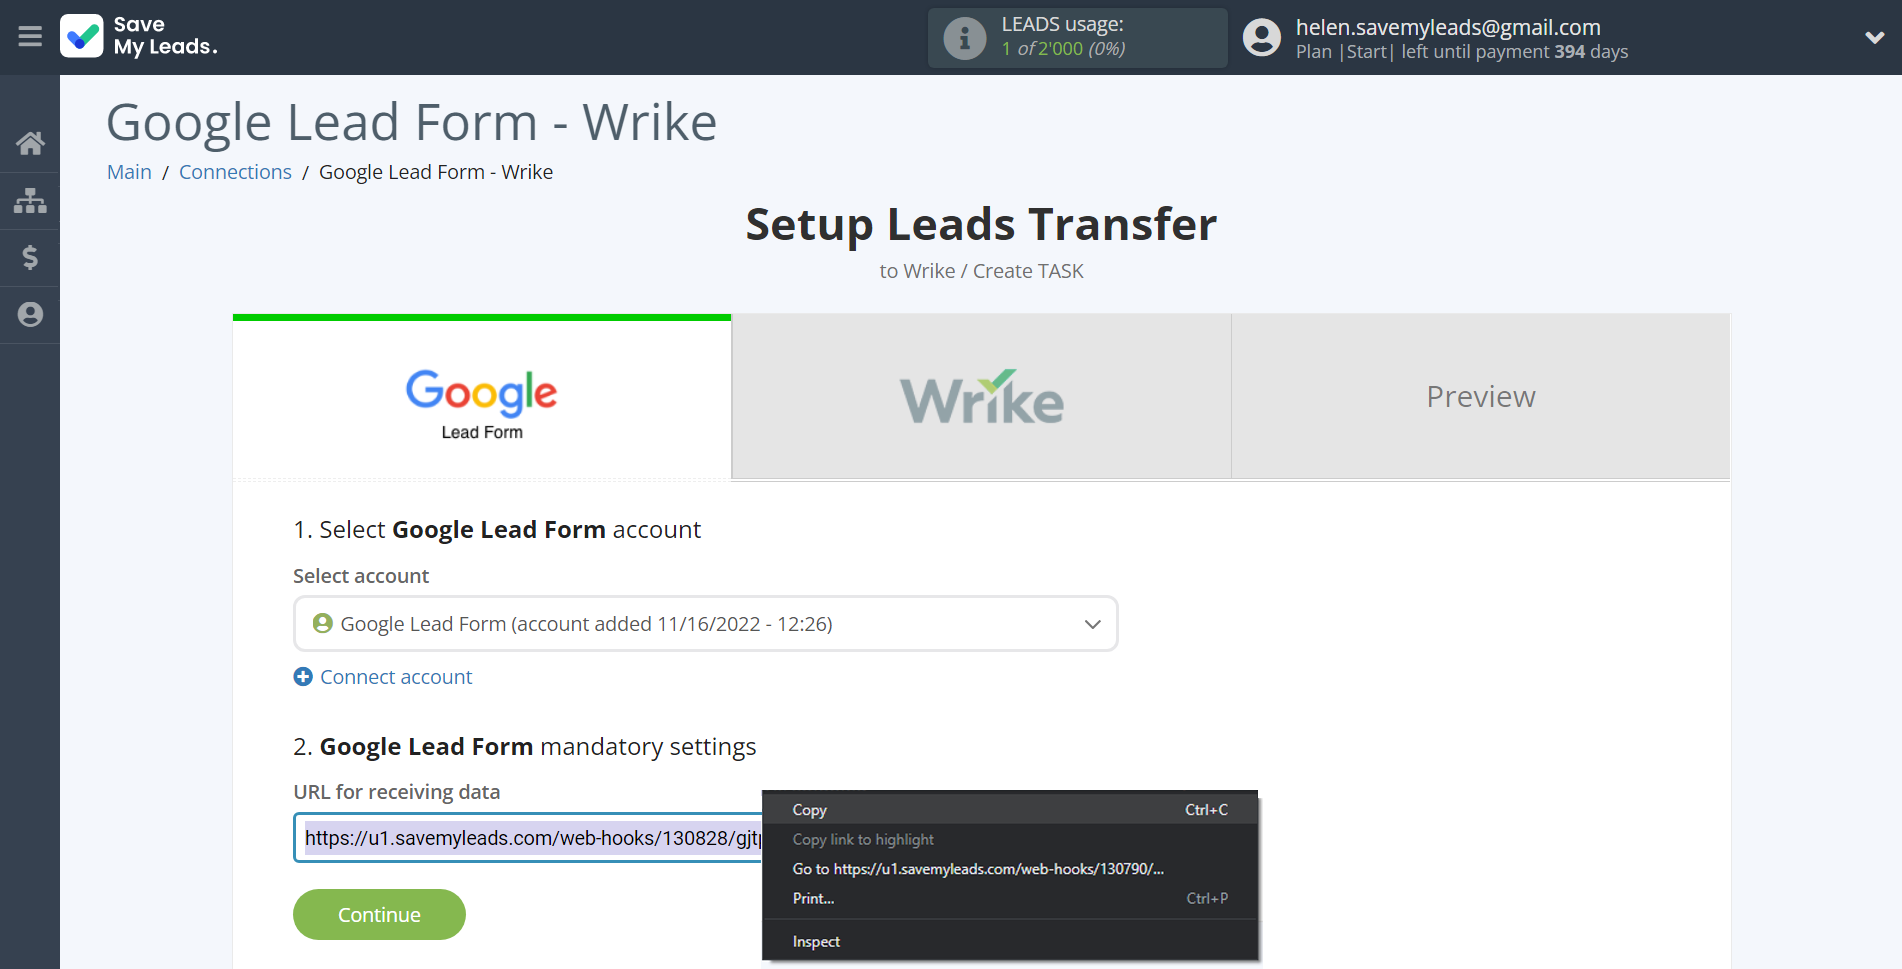 How to Connect Google Lead Form with Wrike | Data Source account connection